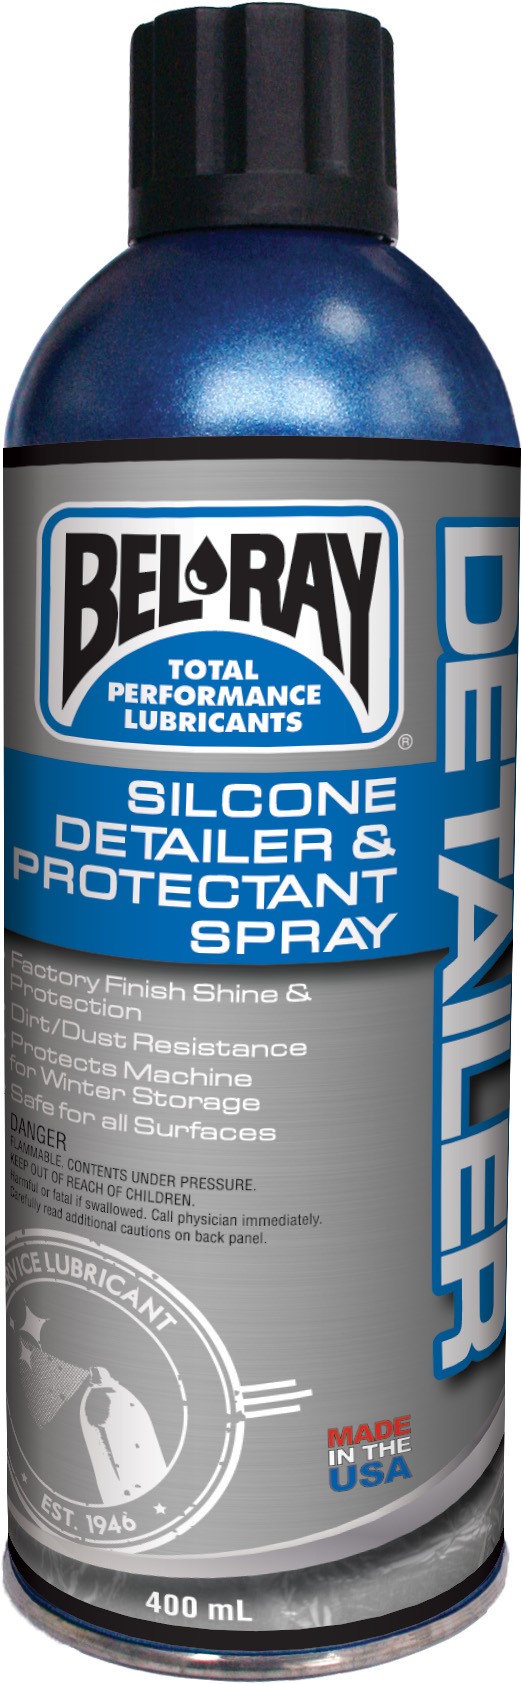 Bel-Ray Silicone Detailer & Protectant Spray 400ML